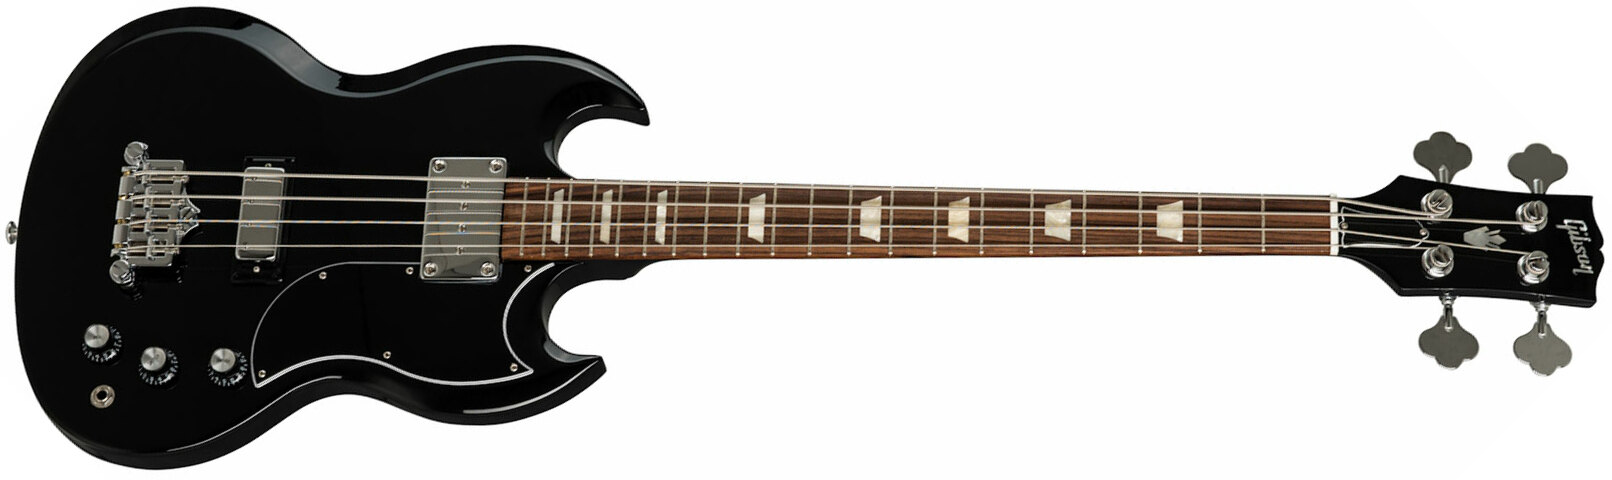 Gibson Sg Standard Bass Original Short Scale Rw - Ebony - Solid body electric bass - Main picture